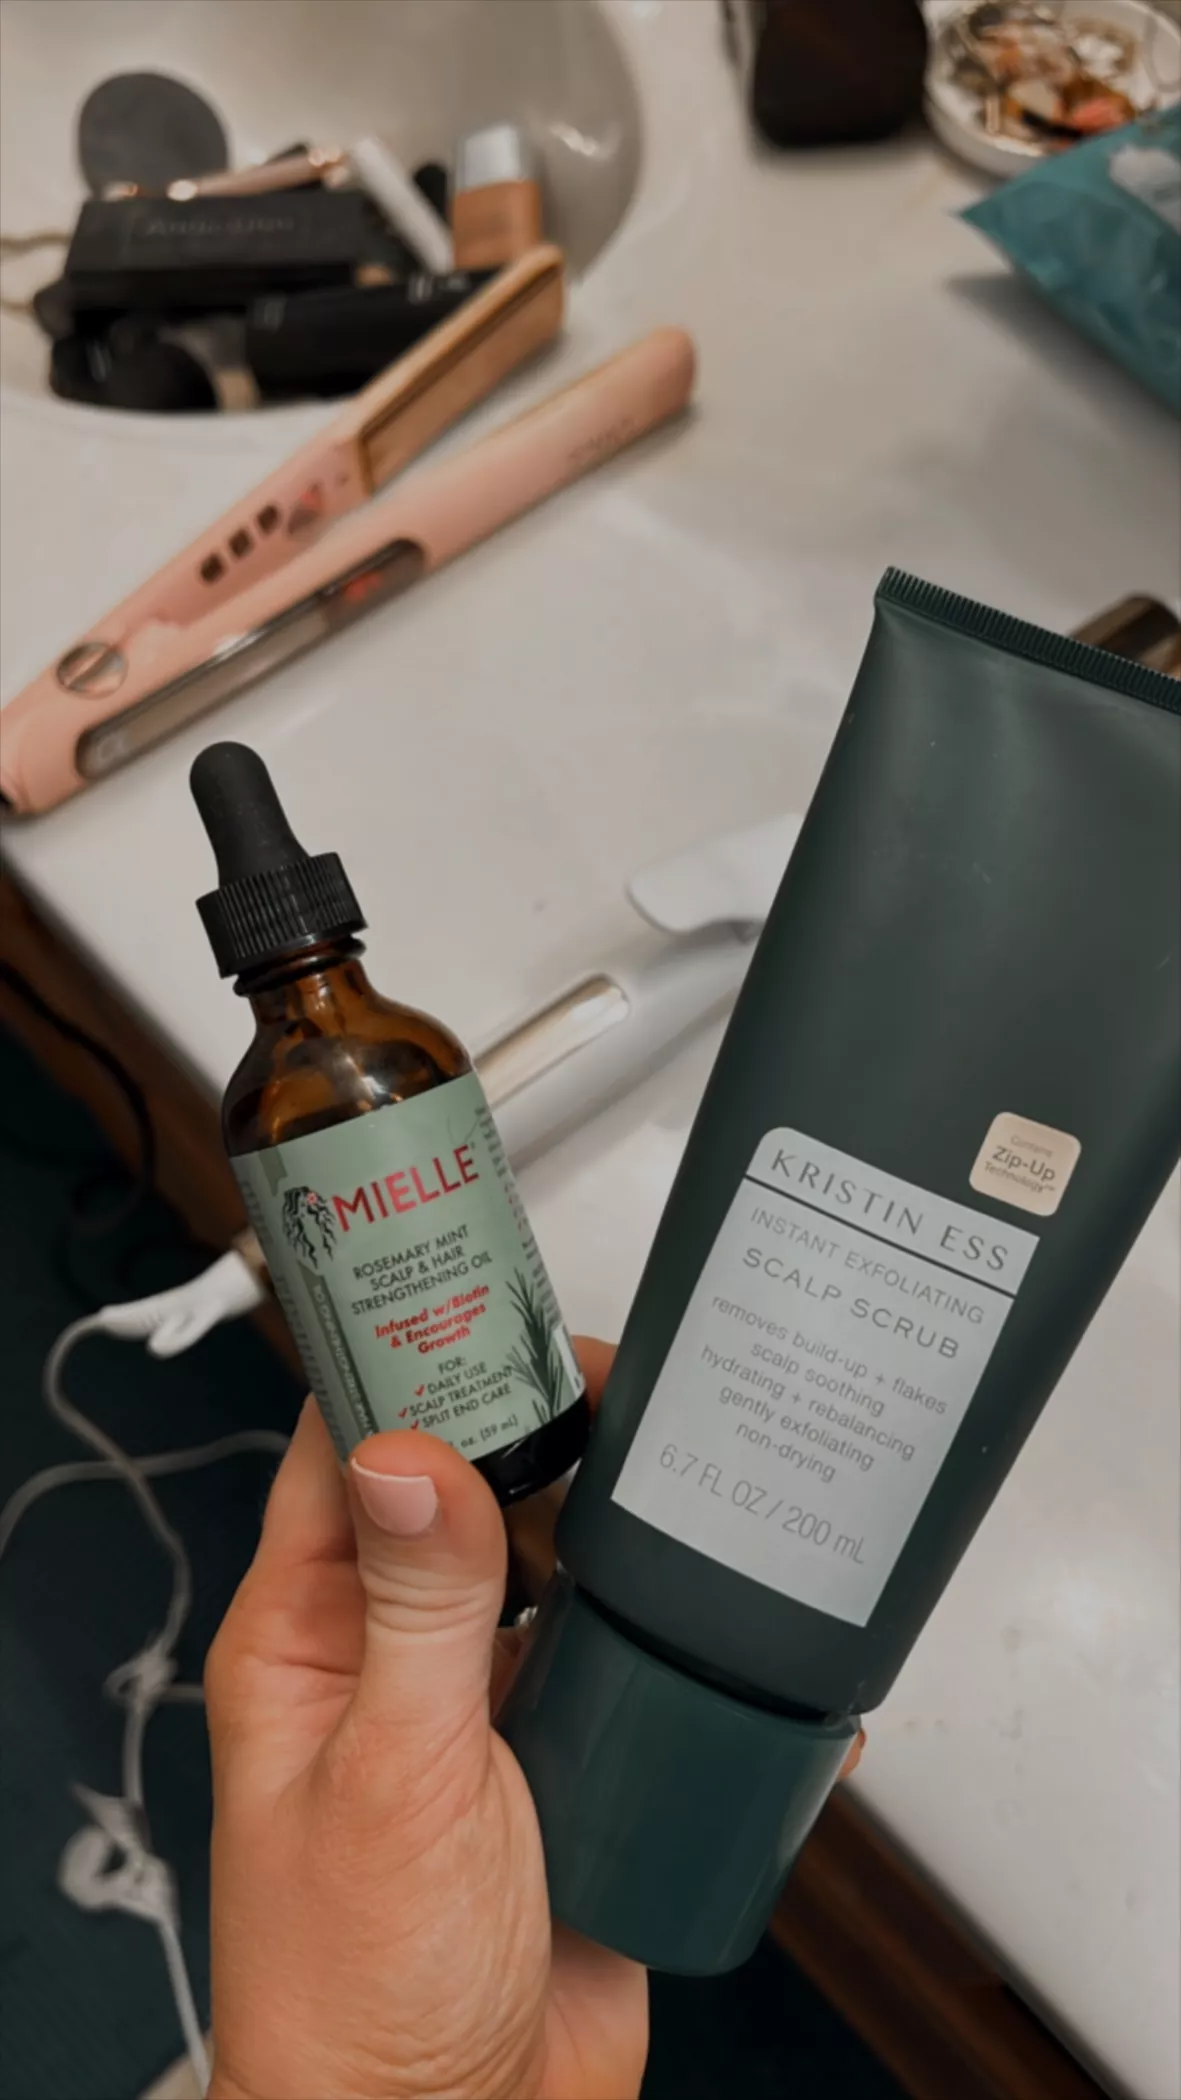 My Mielle Rosemary Mint Scalp & Strengthening Oil Product Review